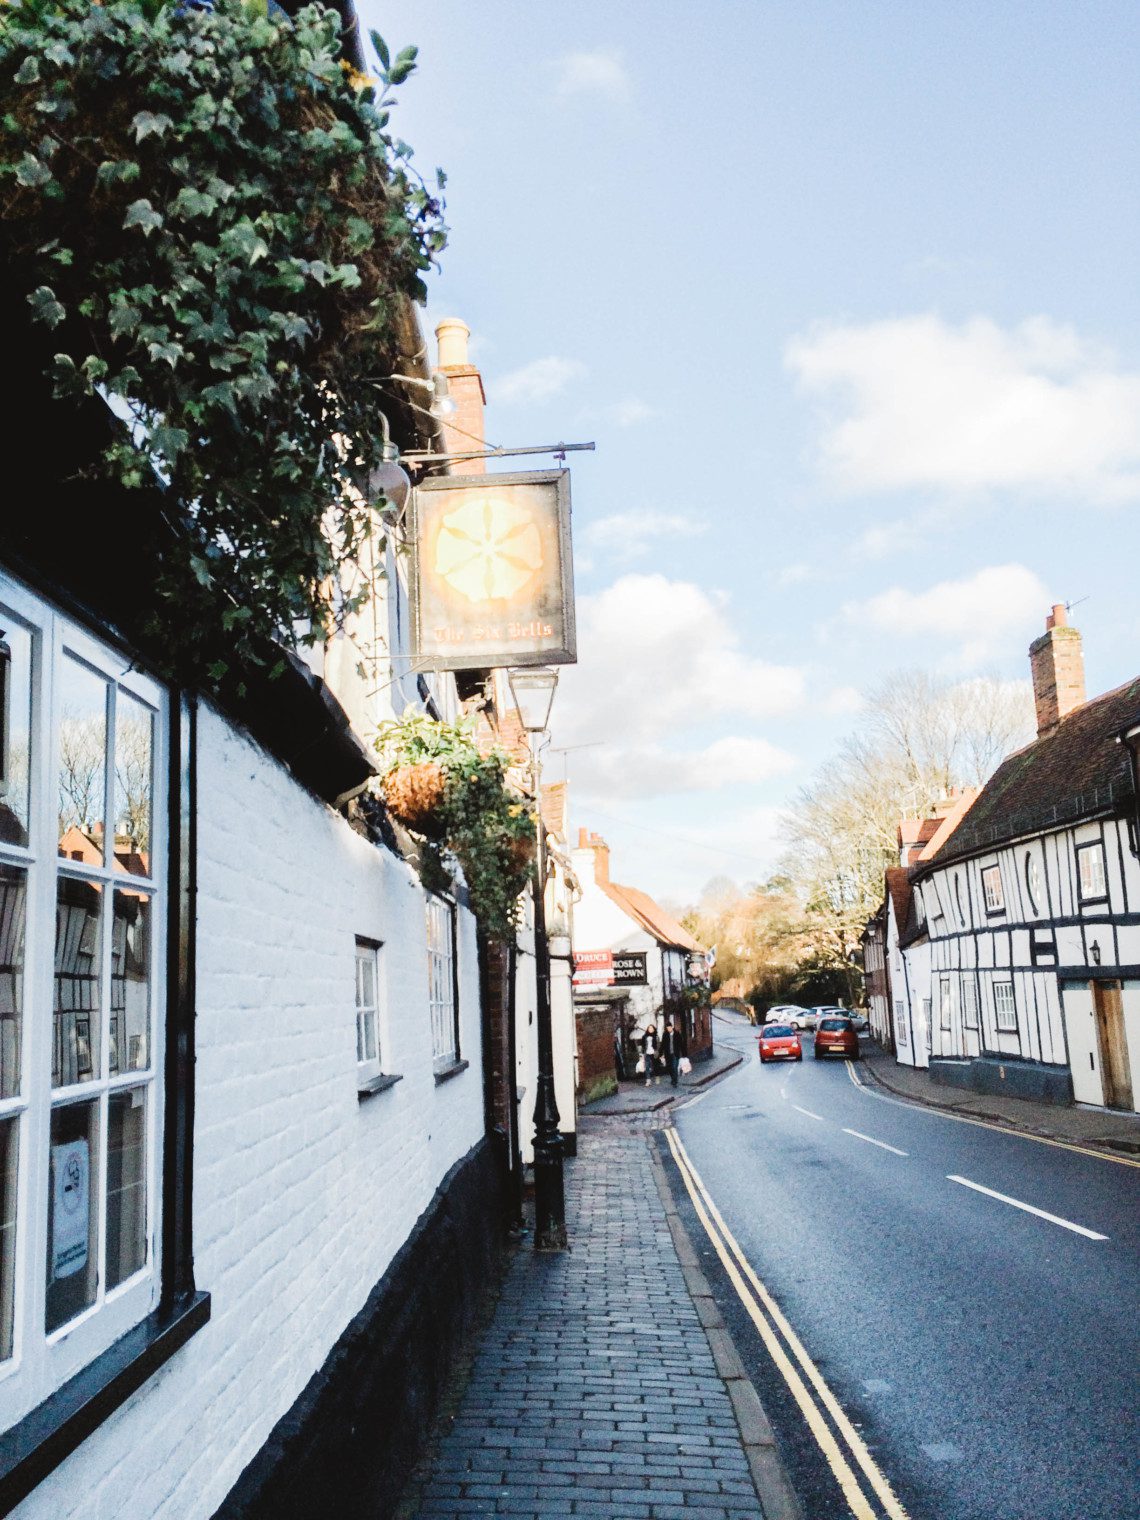 Looking for day trips from London? This is a look at things to do in St. Albans, a beautiful cathedral city that makes an easy trip from London by train.